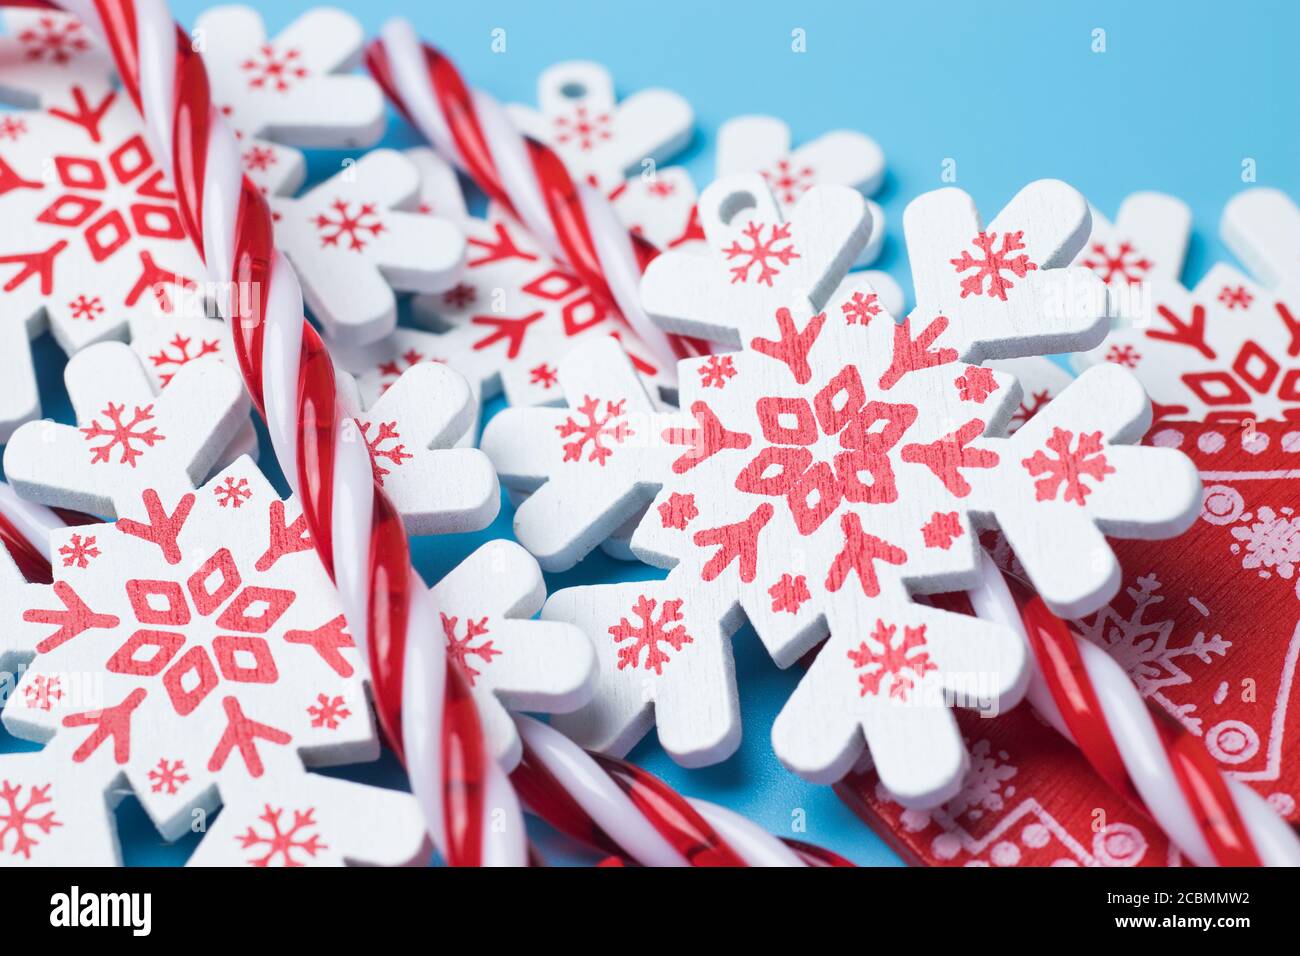 Winter holidays background with toys. New Year and Christmas design Stock Photo